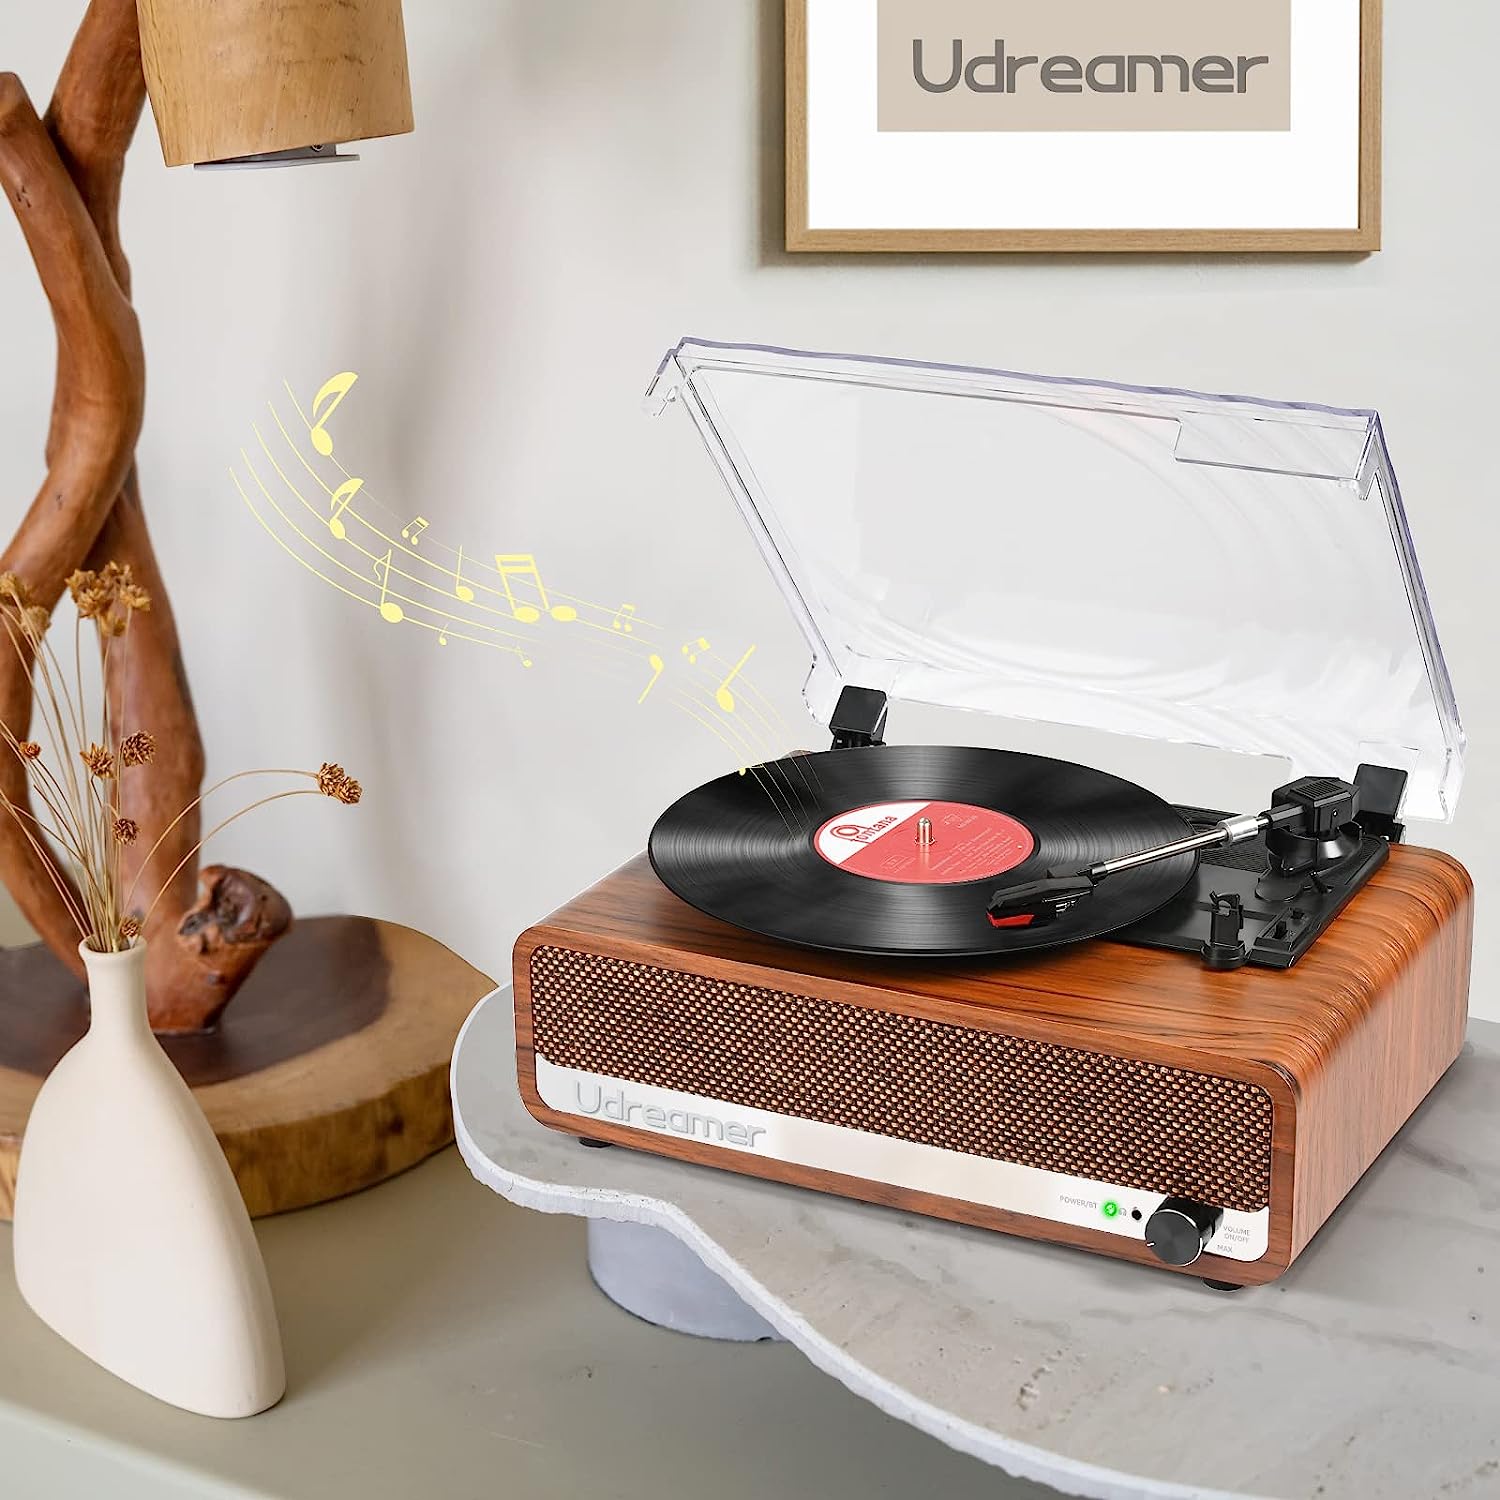 Vinyl Report Player with Upgraded Speakers Needle Pressure Adjustment,Vintage Turntable for Vinyl Records,Portable Vinyl LP Player with 3 Input,RCA Output and Headphone Jack